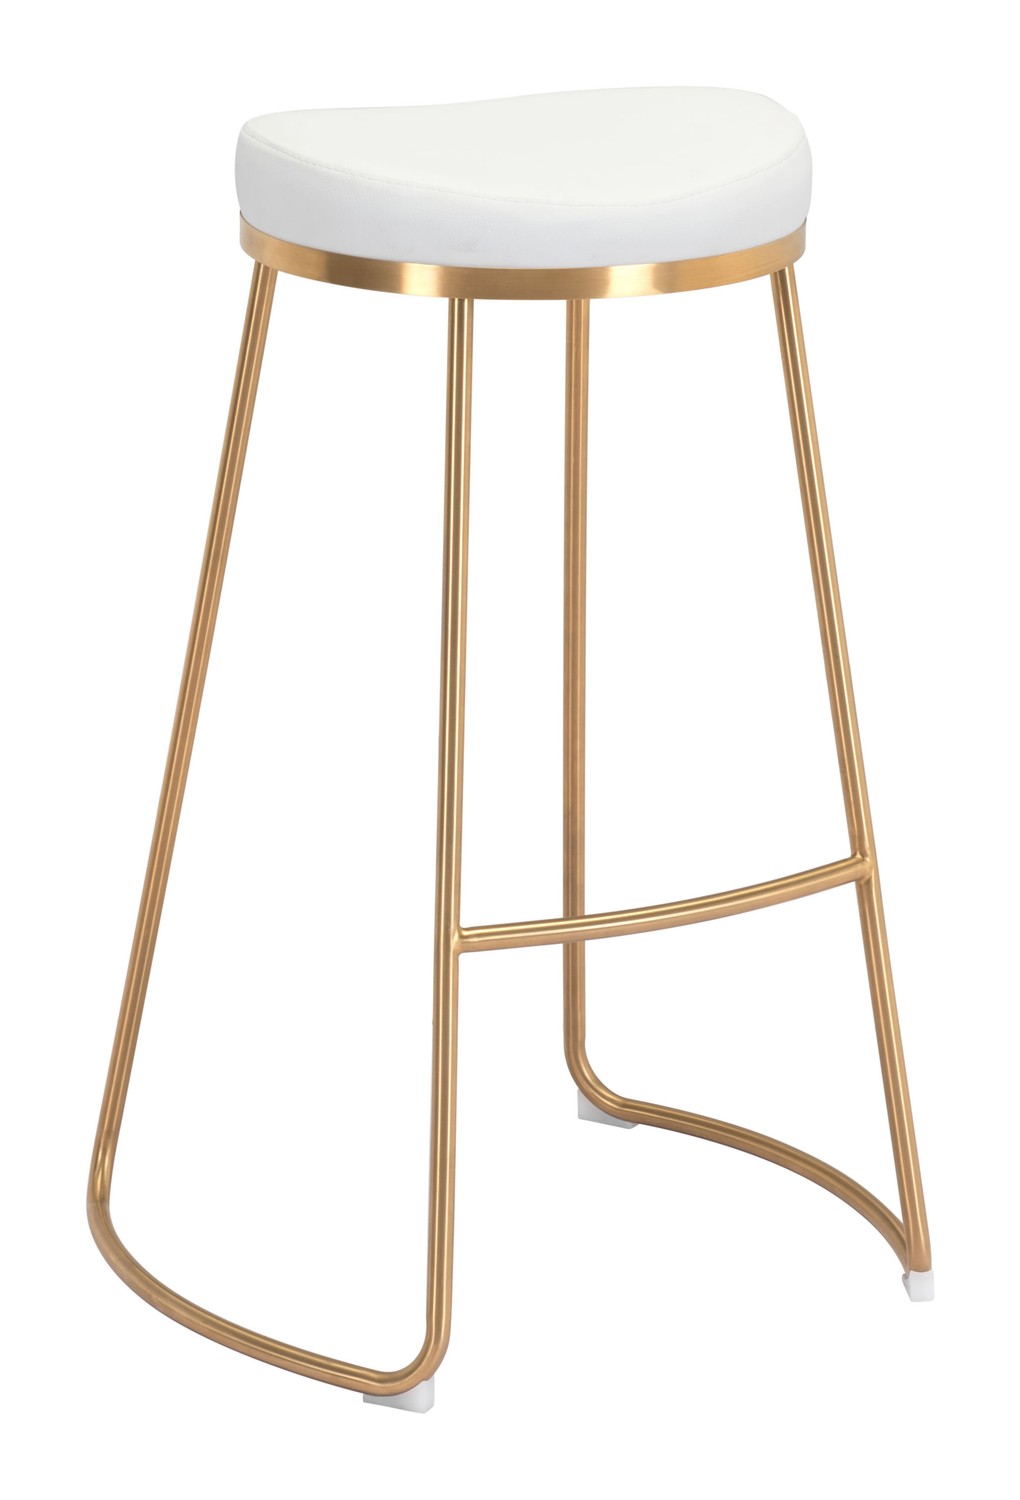 20.3" x 17.5" x 30.5" White, Leatherette, Stainless Steel, Barstool - Set of 2